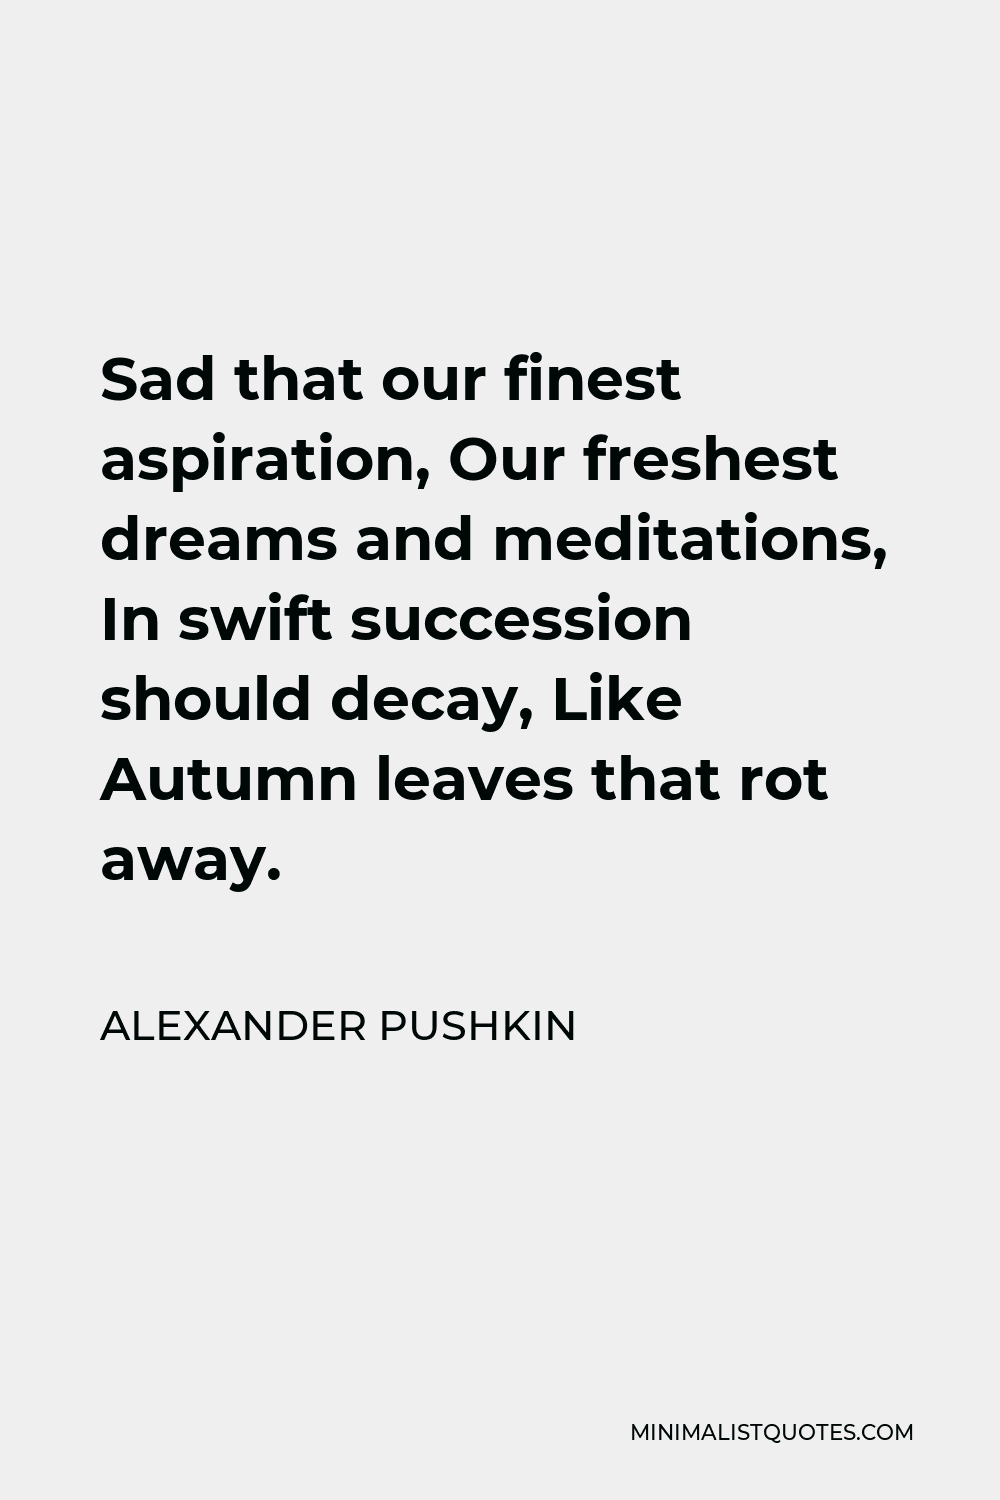 Alexander Pushkin Quote - Sad that our finest aspiration, Our freshest dreams and meditations, In swift succession should decay, Like Autumn leaves that rot away.